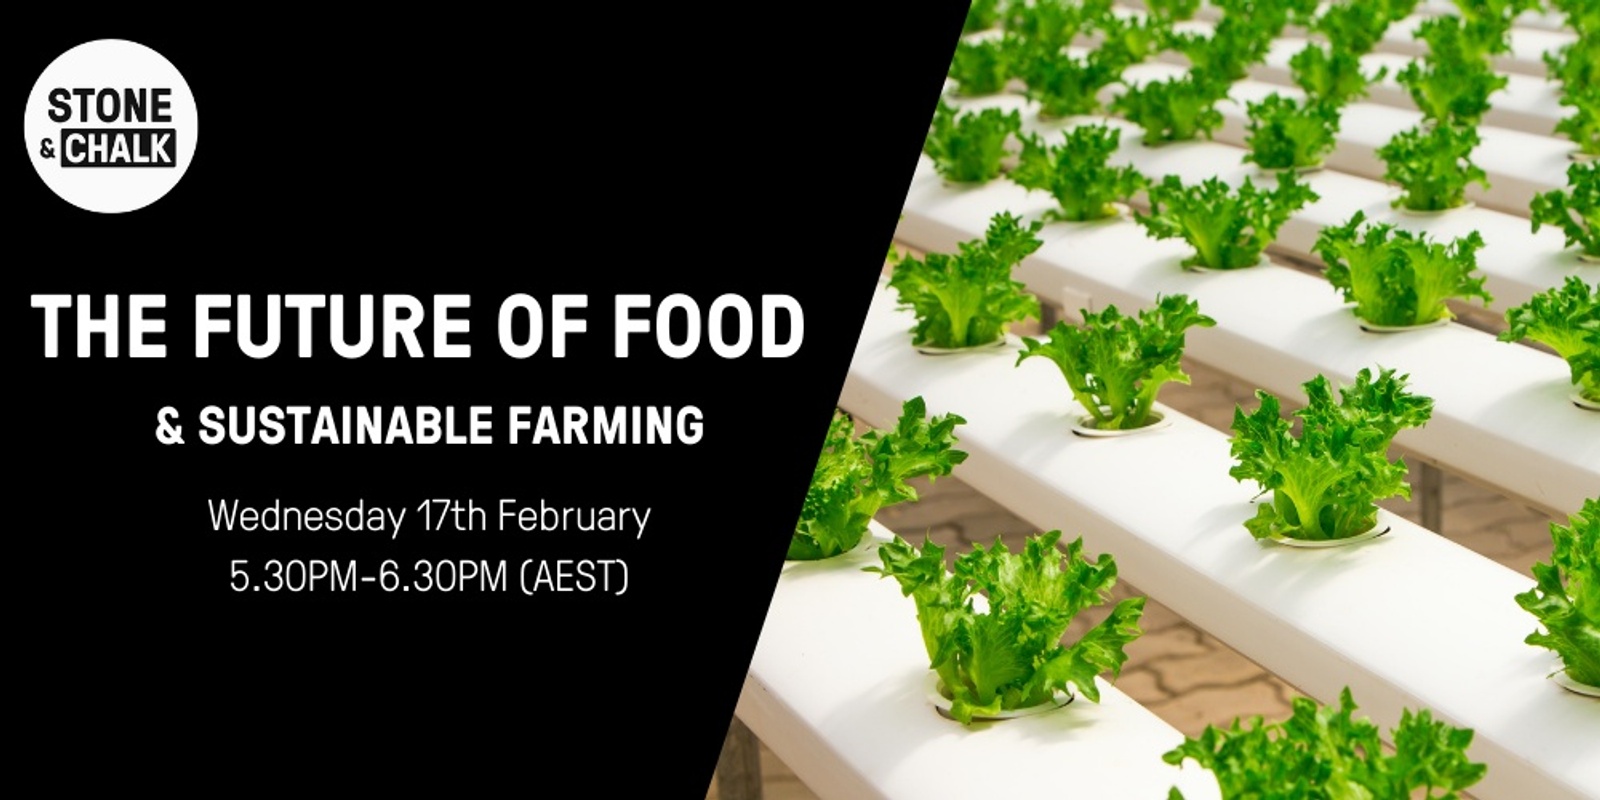 Stone & Chalk Presents: The Future of Food & Sustainable Farming